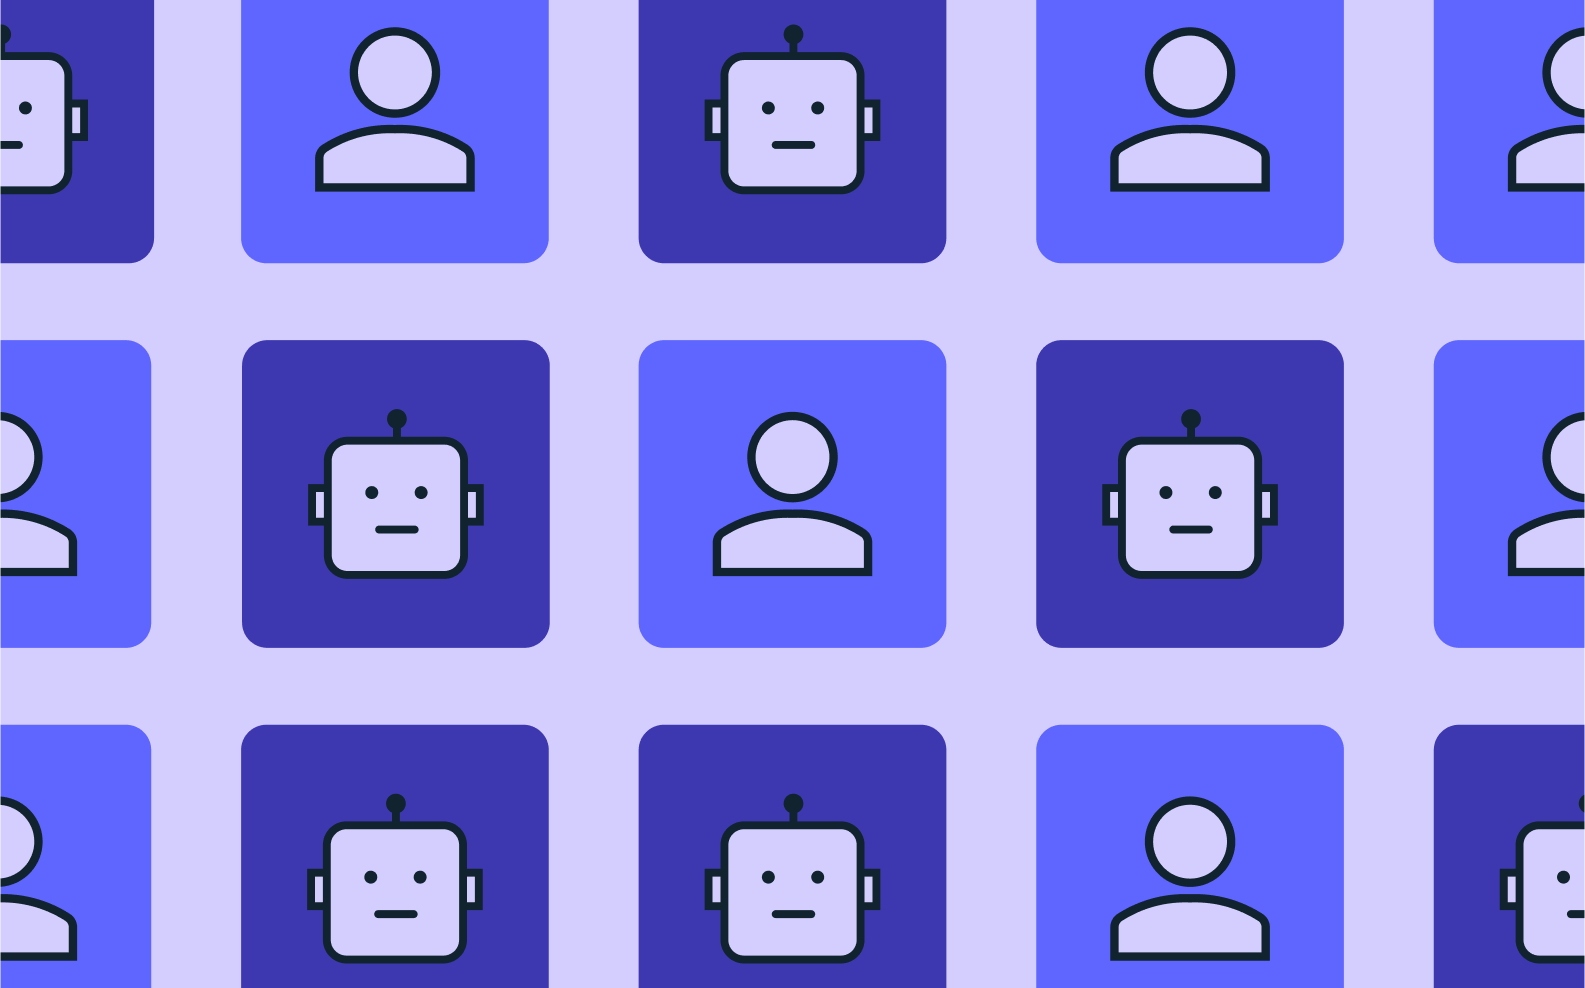 Tiled pattern on purple background of alternating icons representing bots and humans